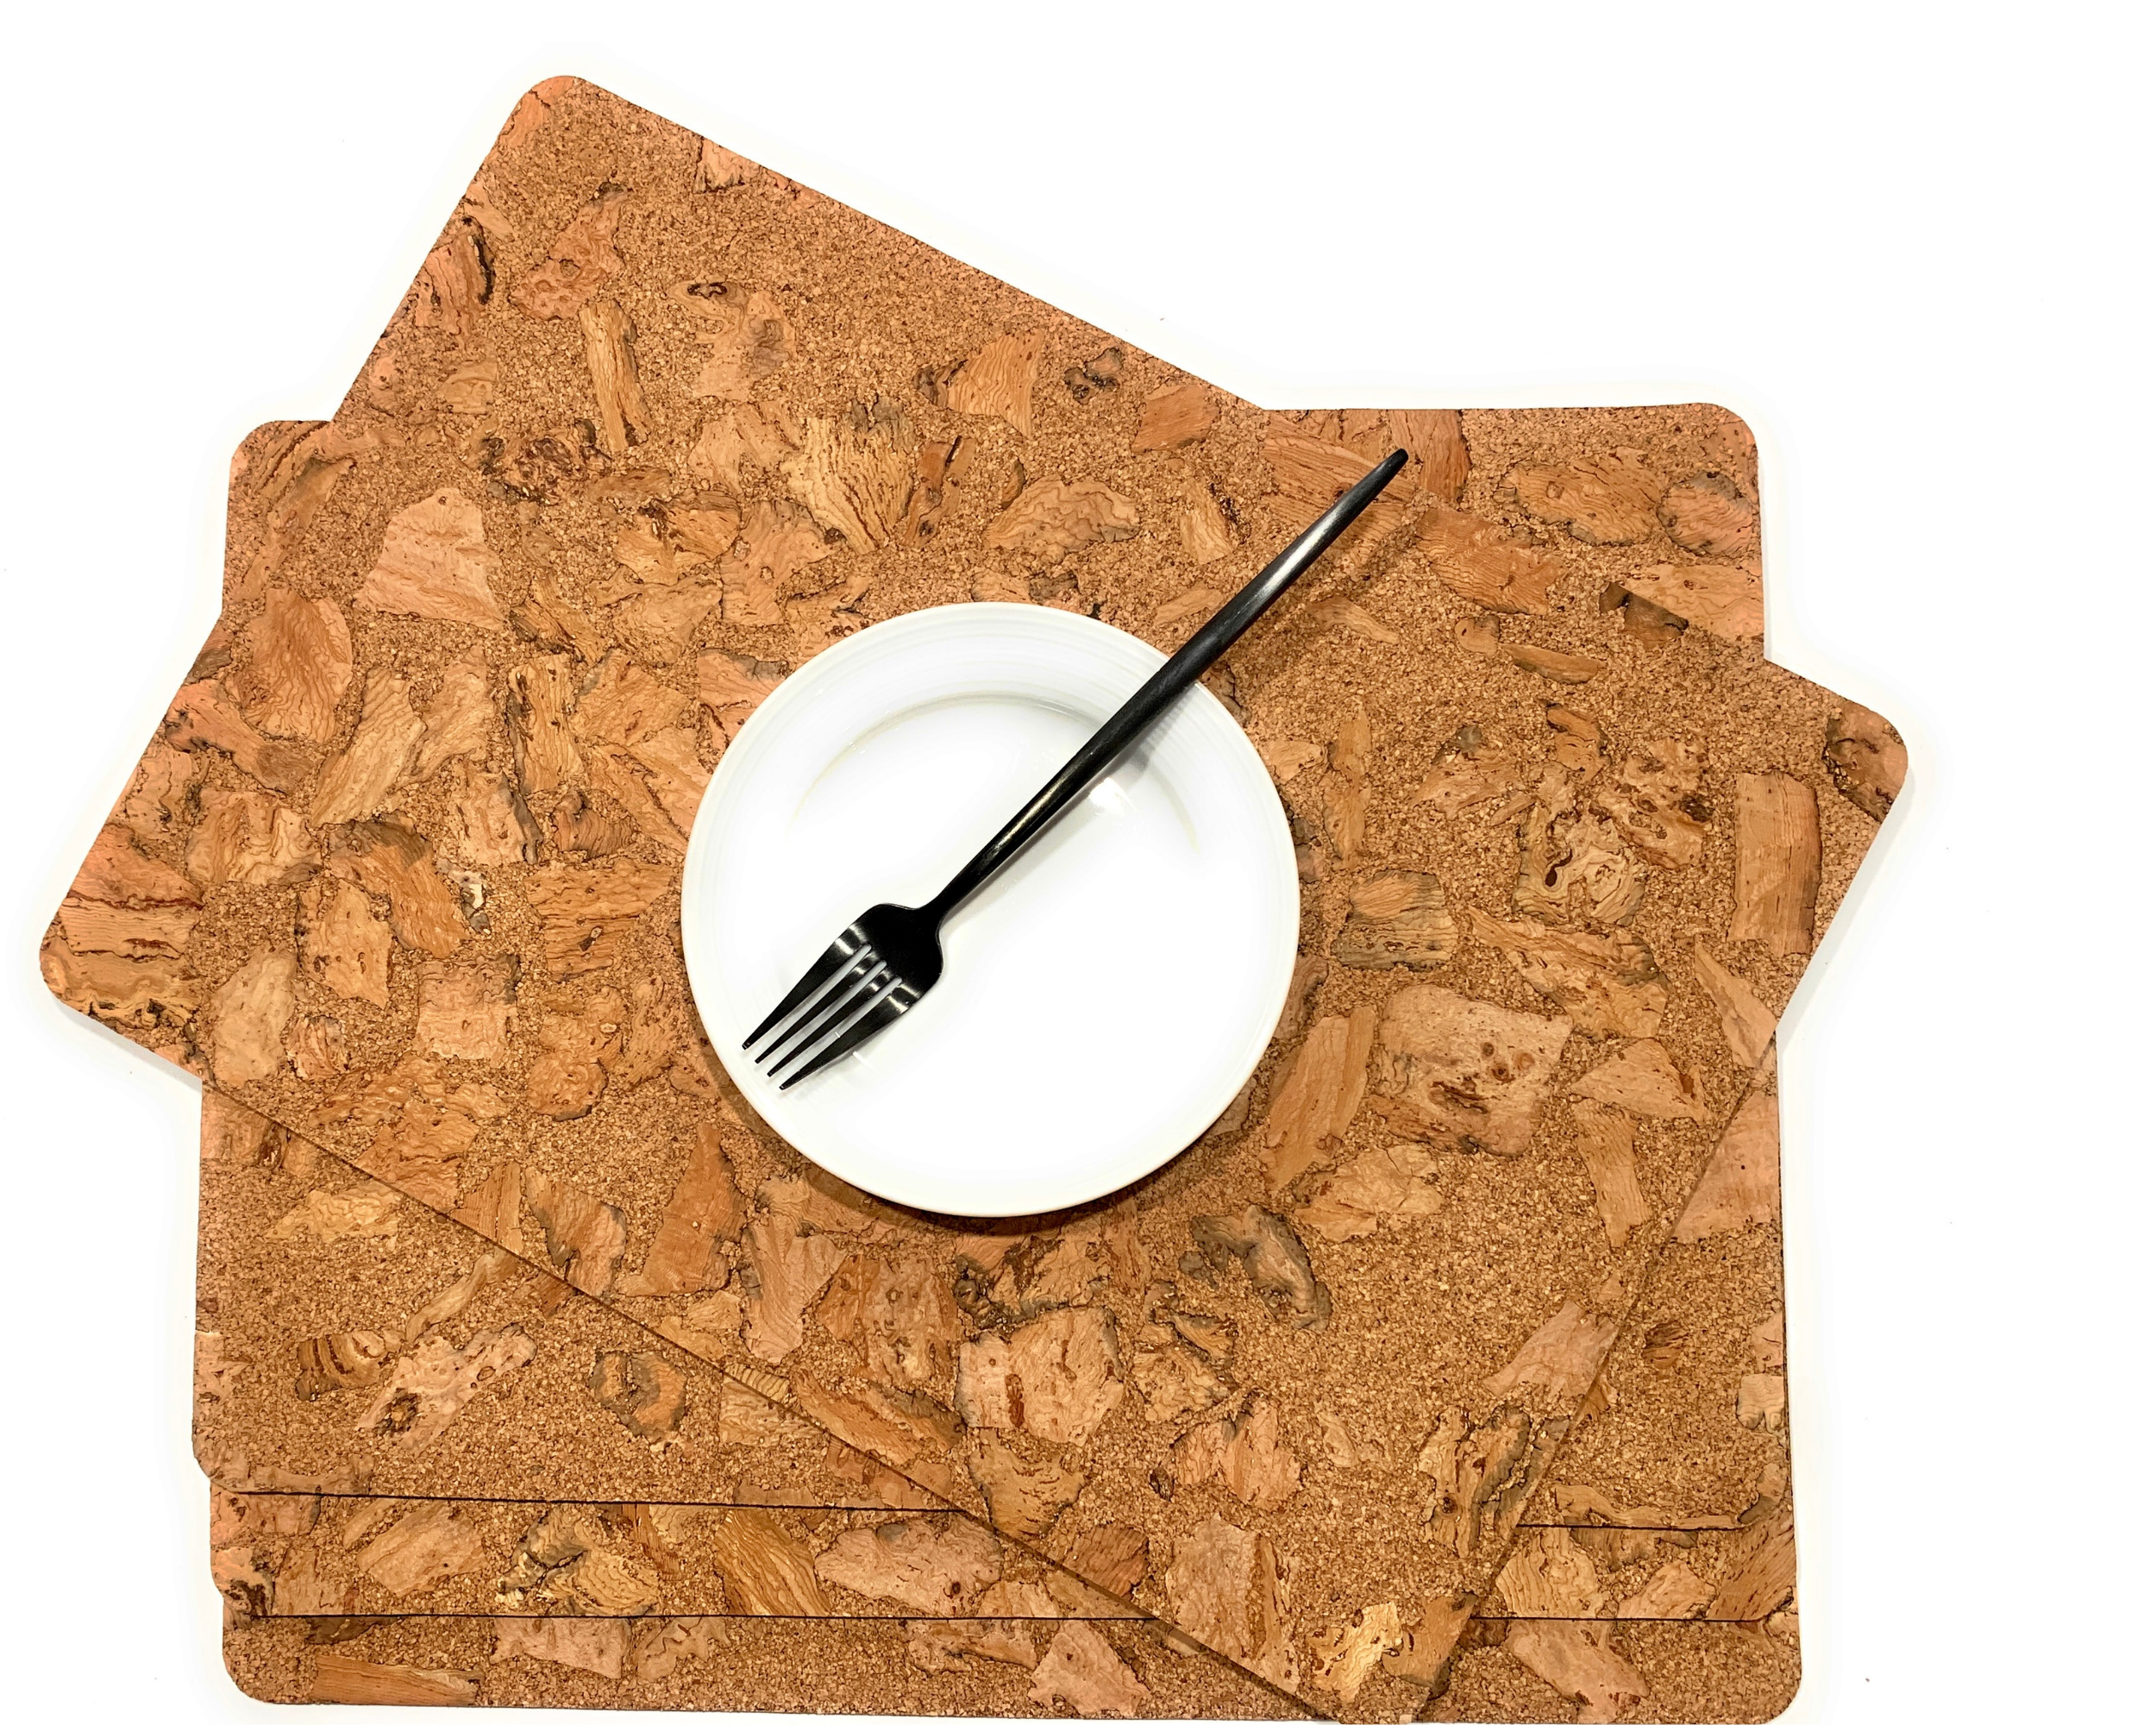 6 reasons cork is the best material for placemats